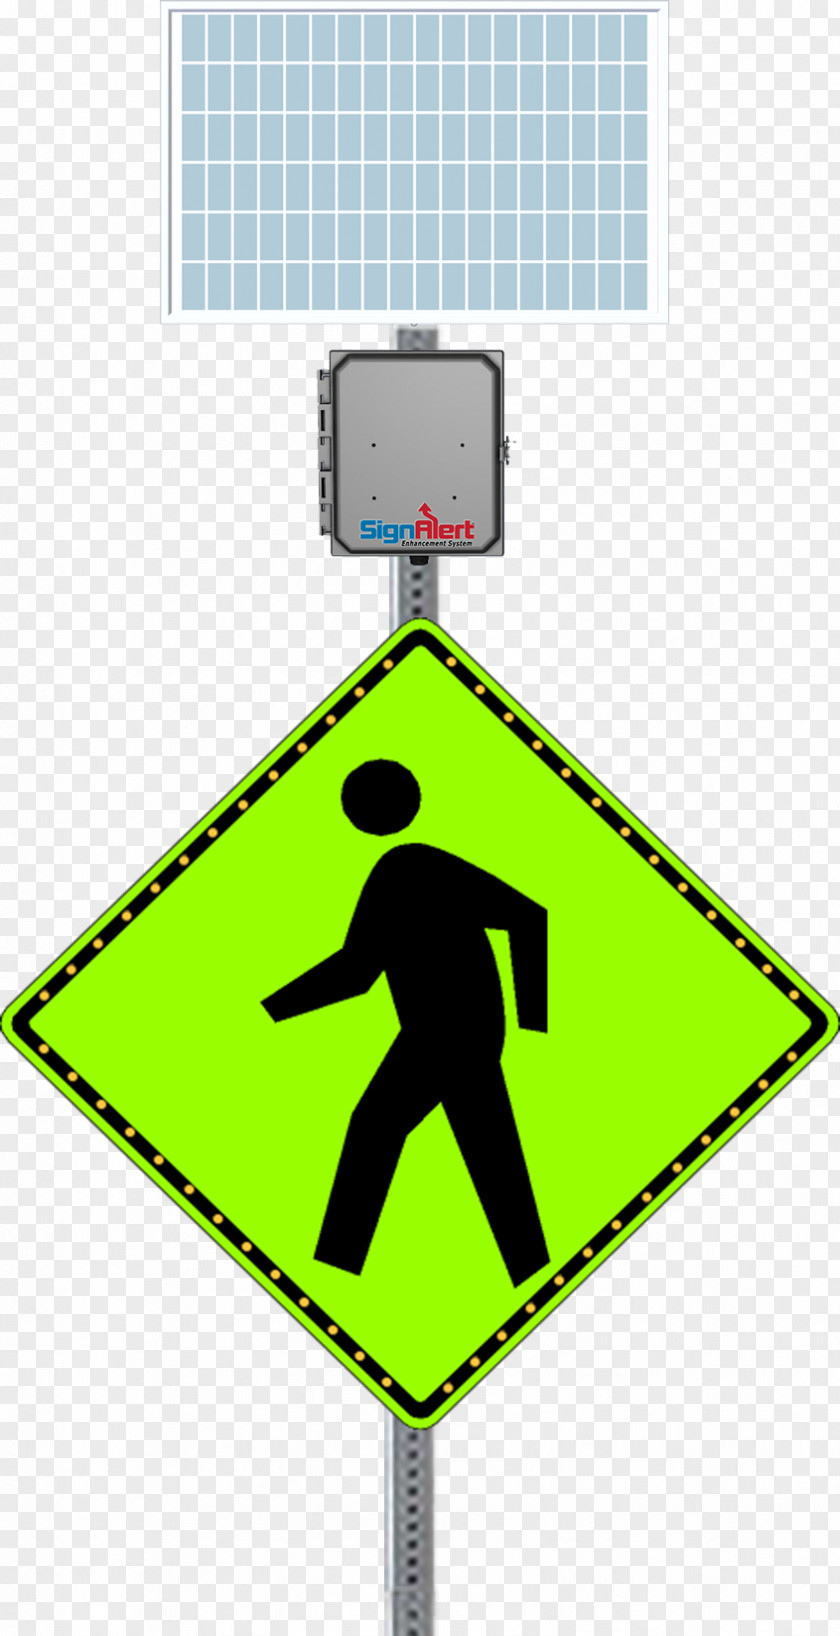 Road Manual On Uniform Traffic Control Devices Pedestrian Crossing Sign Warning PNG